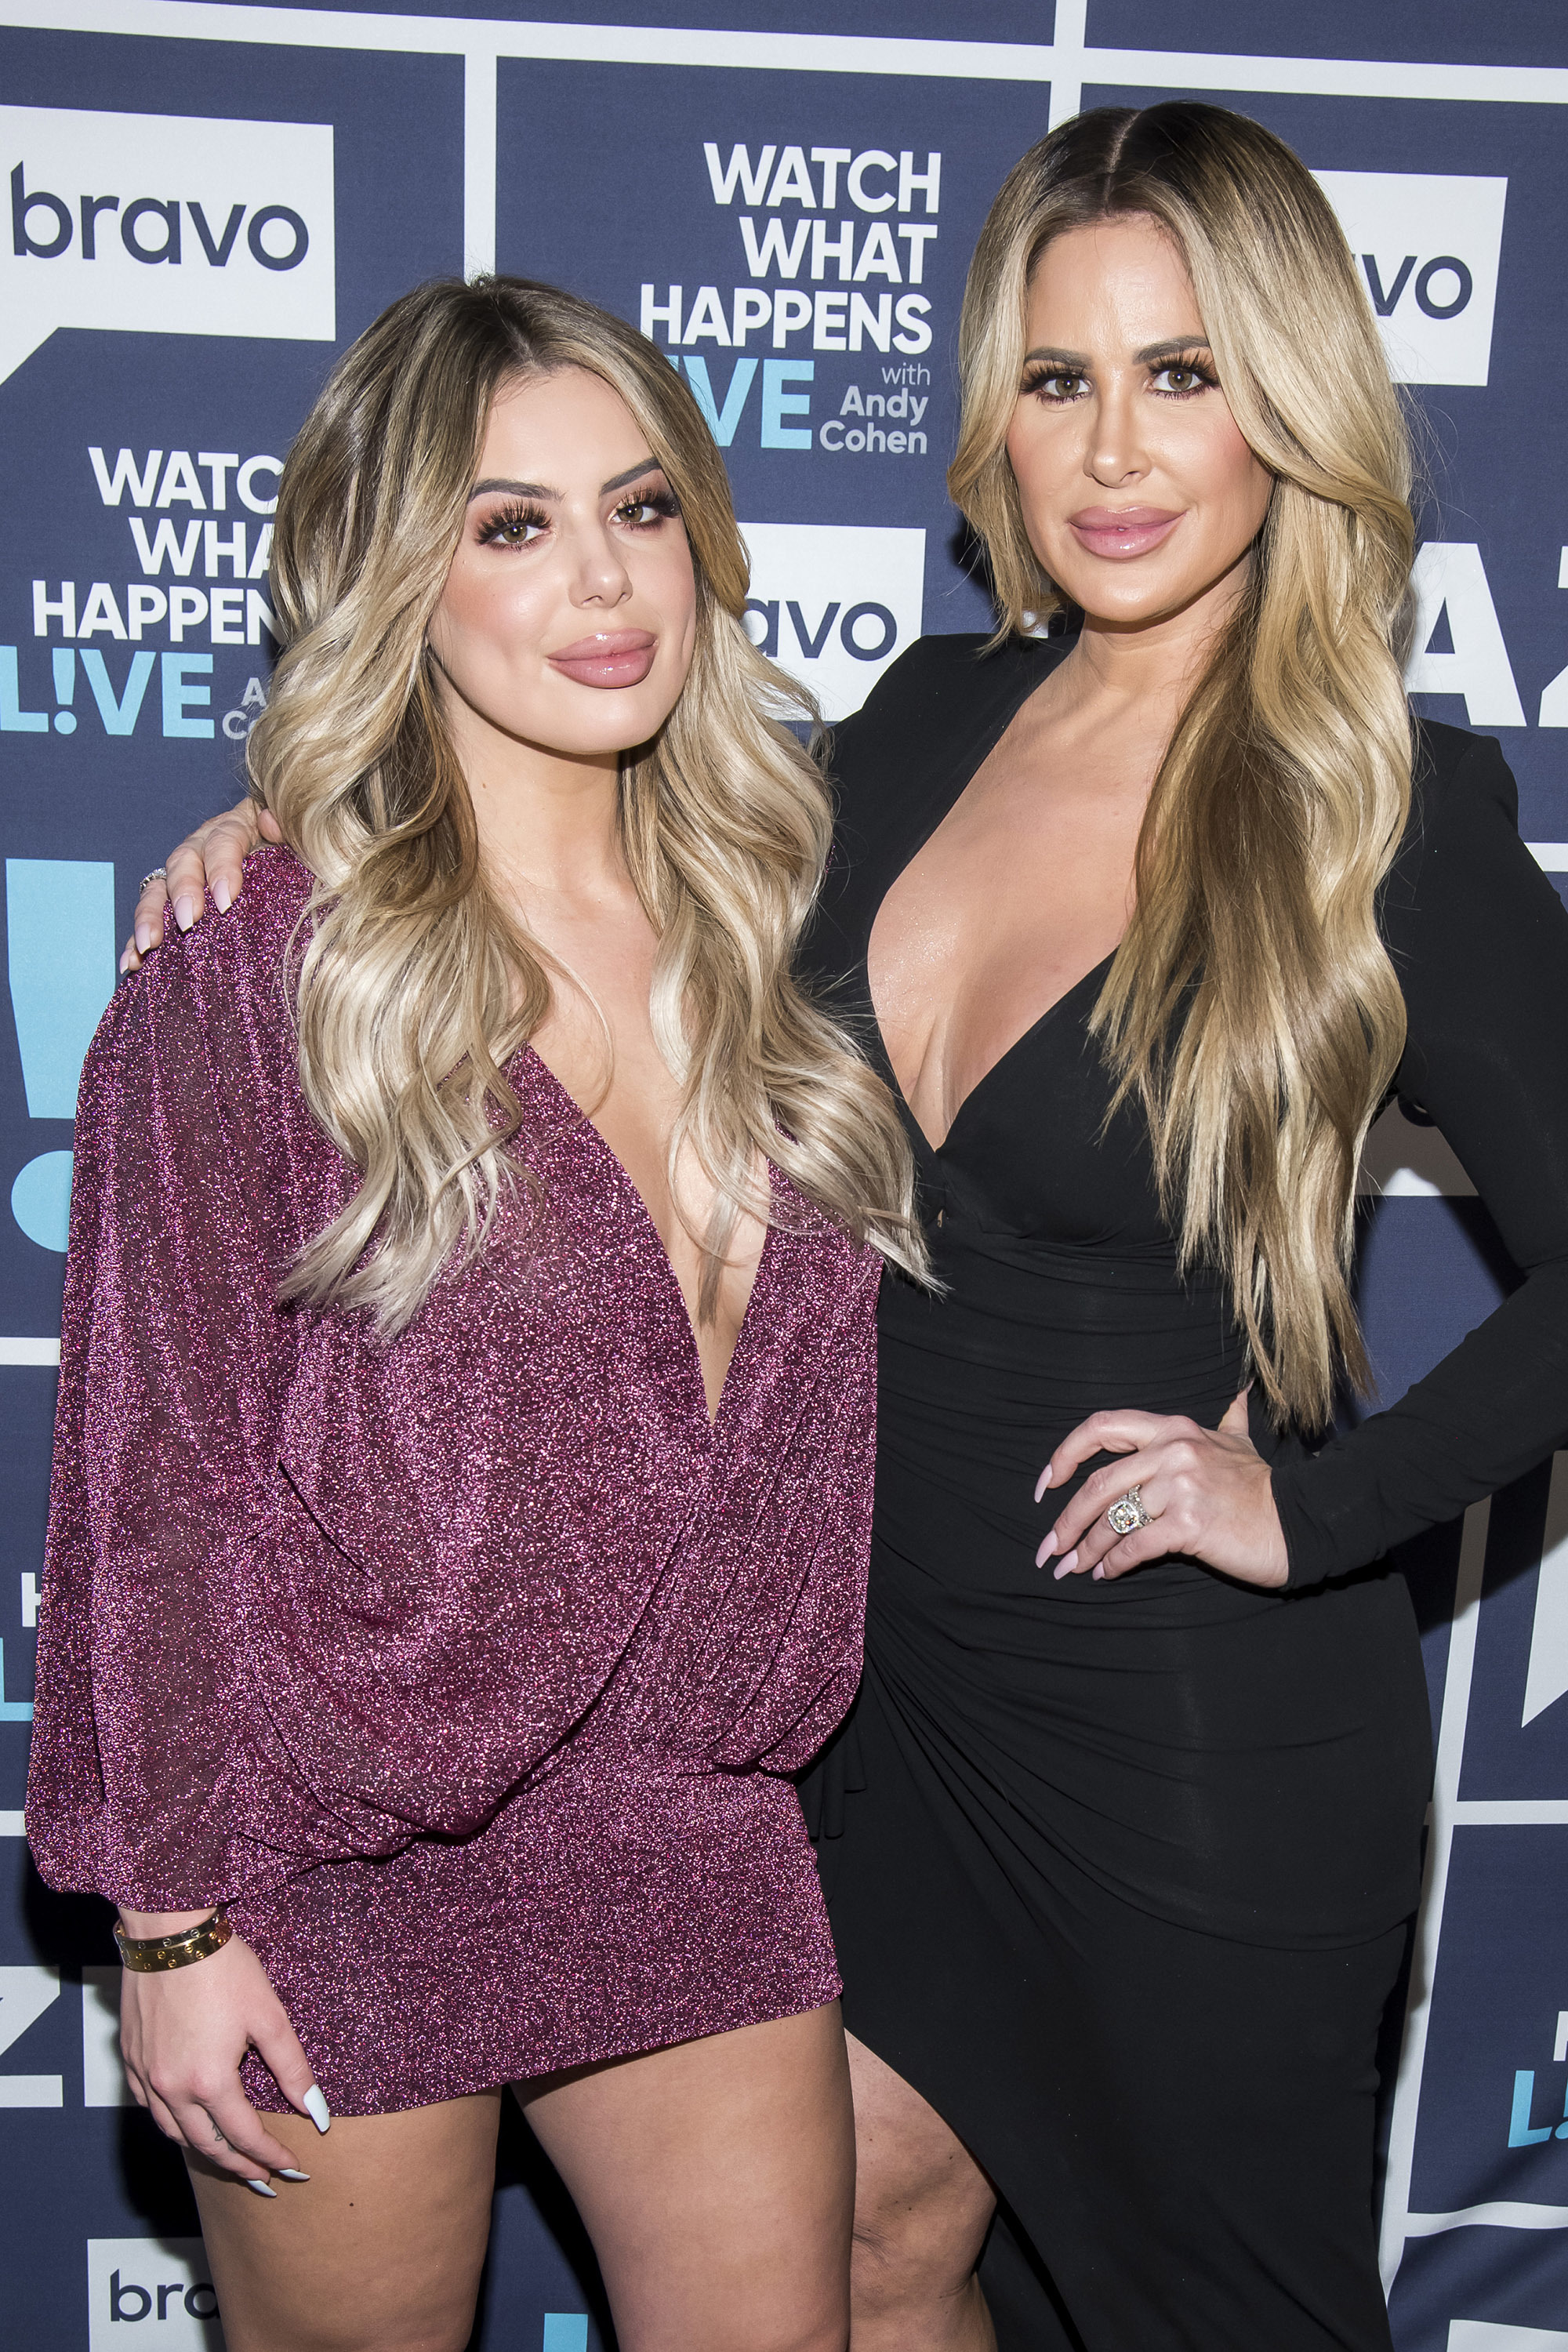 <p>Brielle Biermann and mom <a href="https://www.wonderwall.com/celebrity/profiles/overview/kim-zolciak-1280.article">Kim Zolciak</a>-Biermann looked almost identical when they were photographed visiting "Watch What Happens Live With Andy Cohen" in New York City on Feb. 17, 2019. Brielle, who was born in 1997, still appears on "Don't Be Tardy" with the rest of her family and, like her mom, has become a big fan of <a href="https://www.wonderwall.com/celebrity/photos/celeb-plastic-surgery-transformations-13401.gallery?photoId=1044995">plastic surgery procedures</a> like lip-plumping.</p>